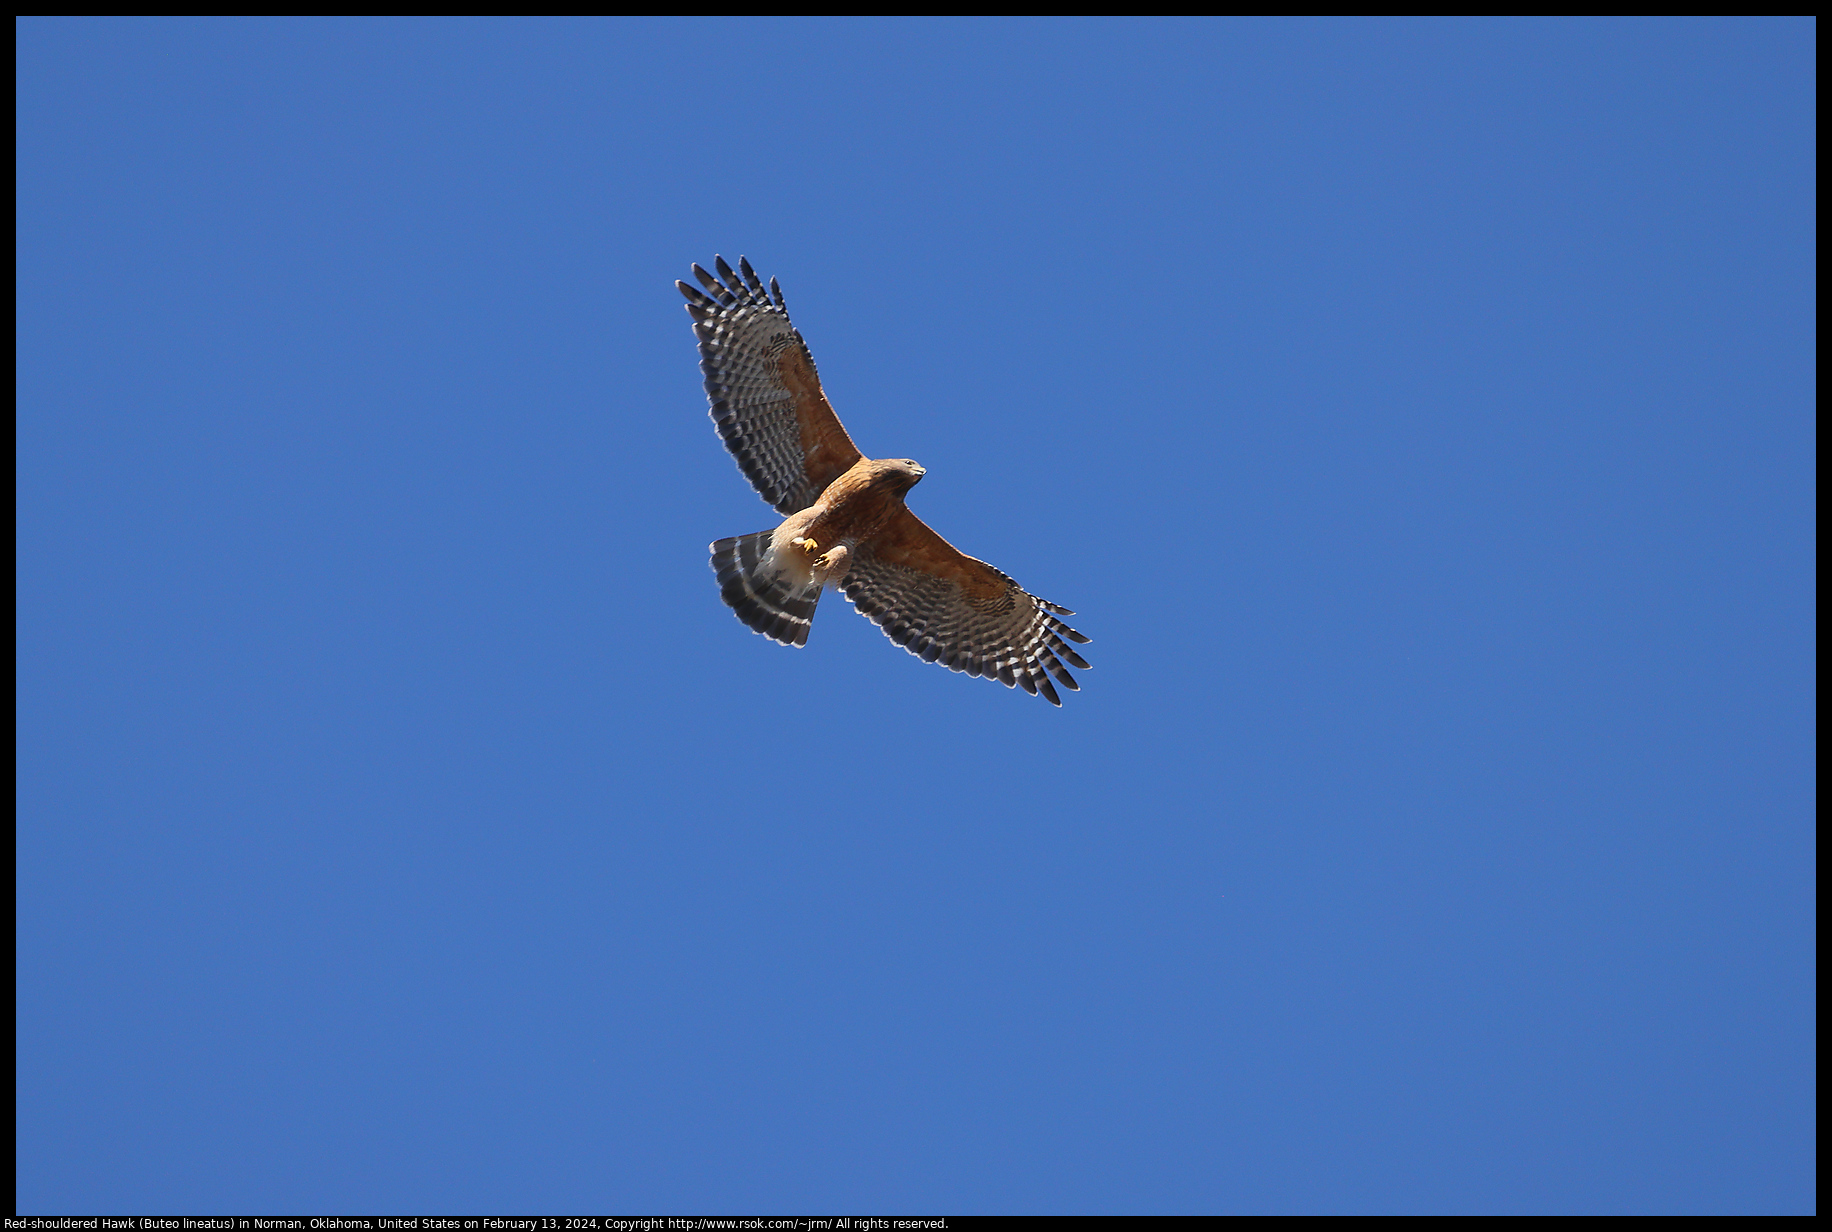 Red-shouldered Hawk (Buteo lineatus) in Norman, Oklahoma, United States on February 13, 2024